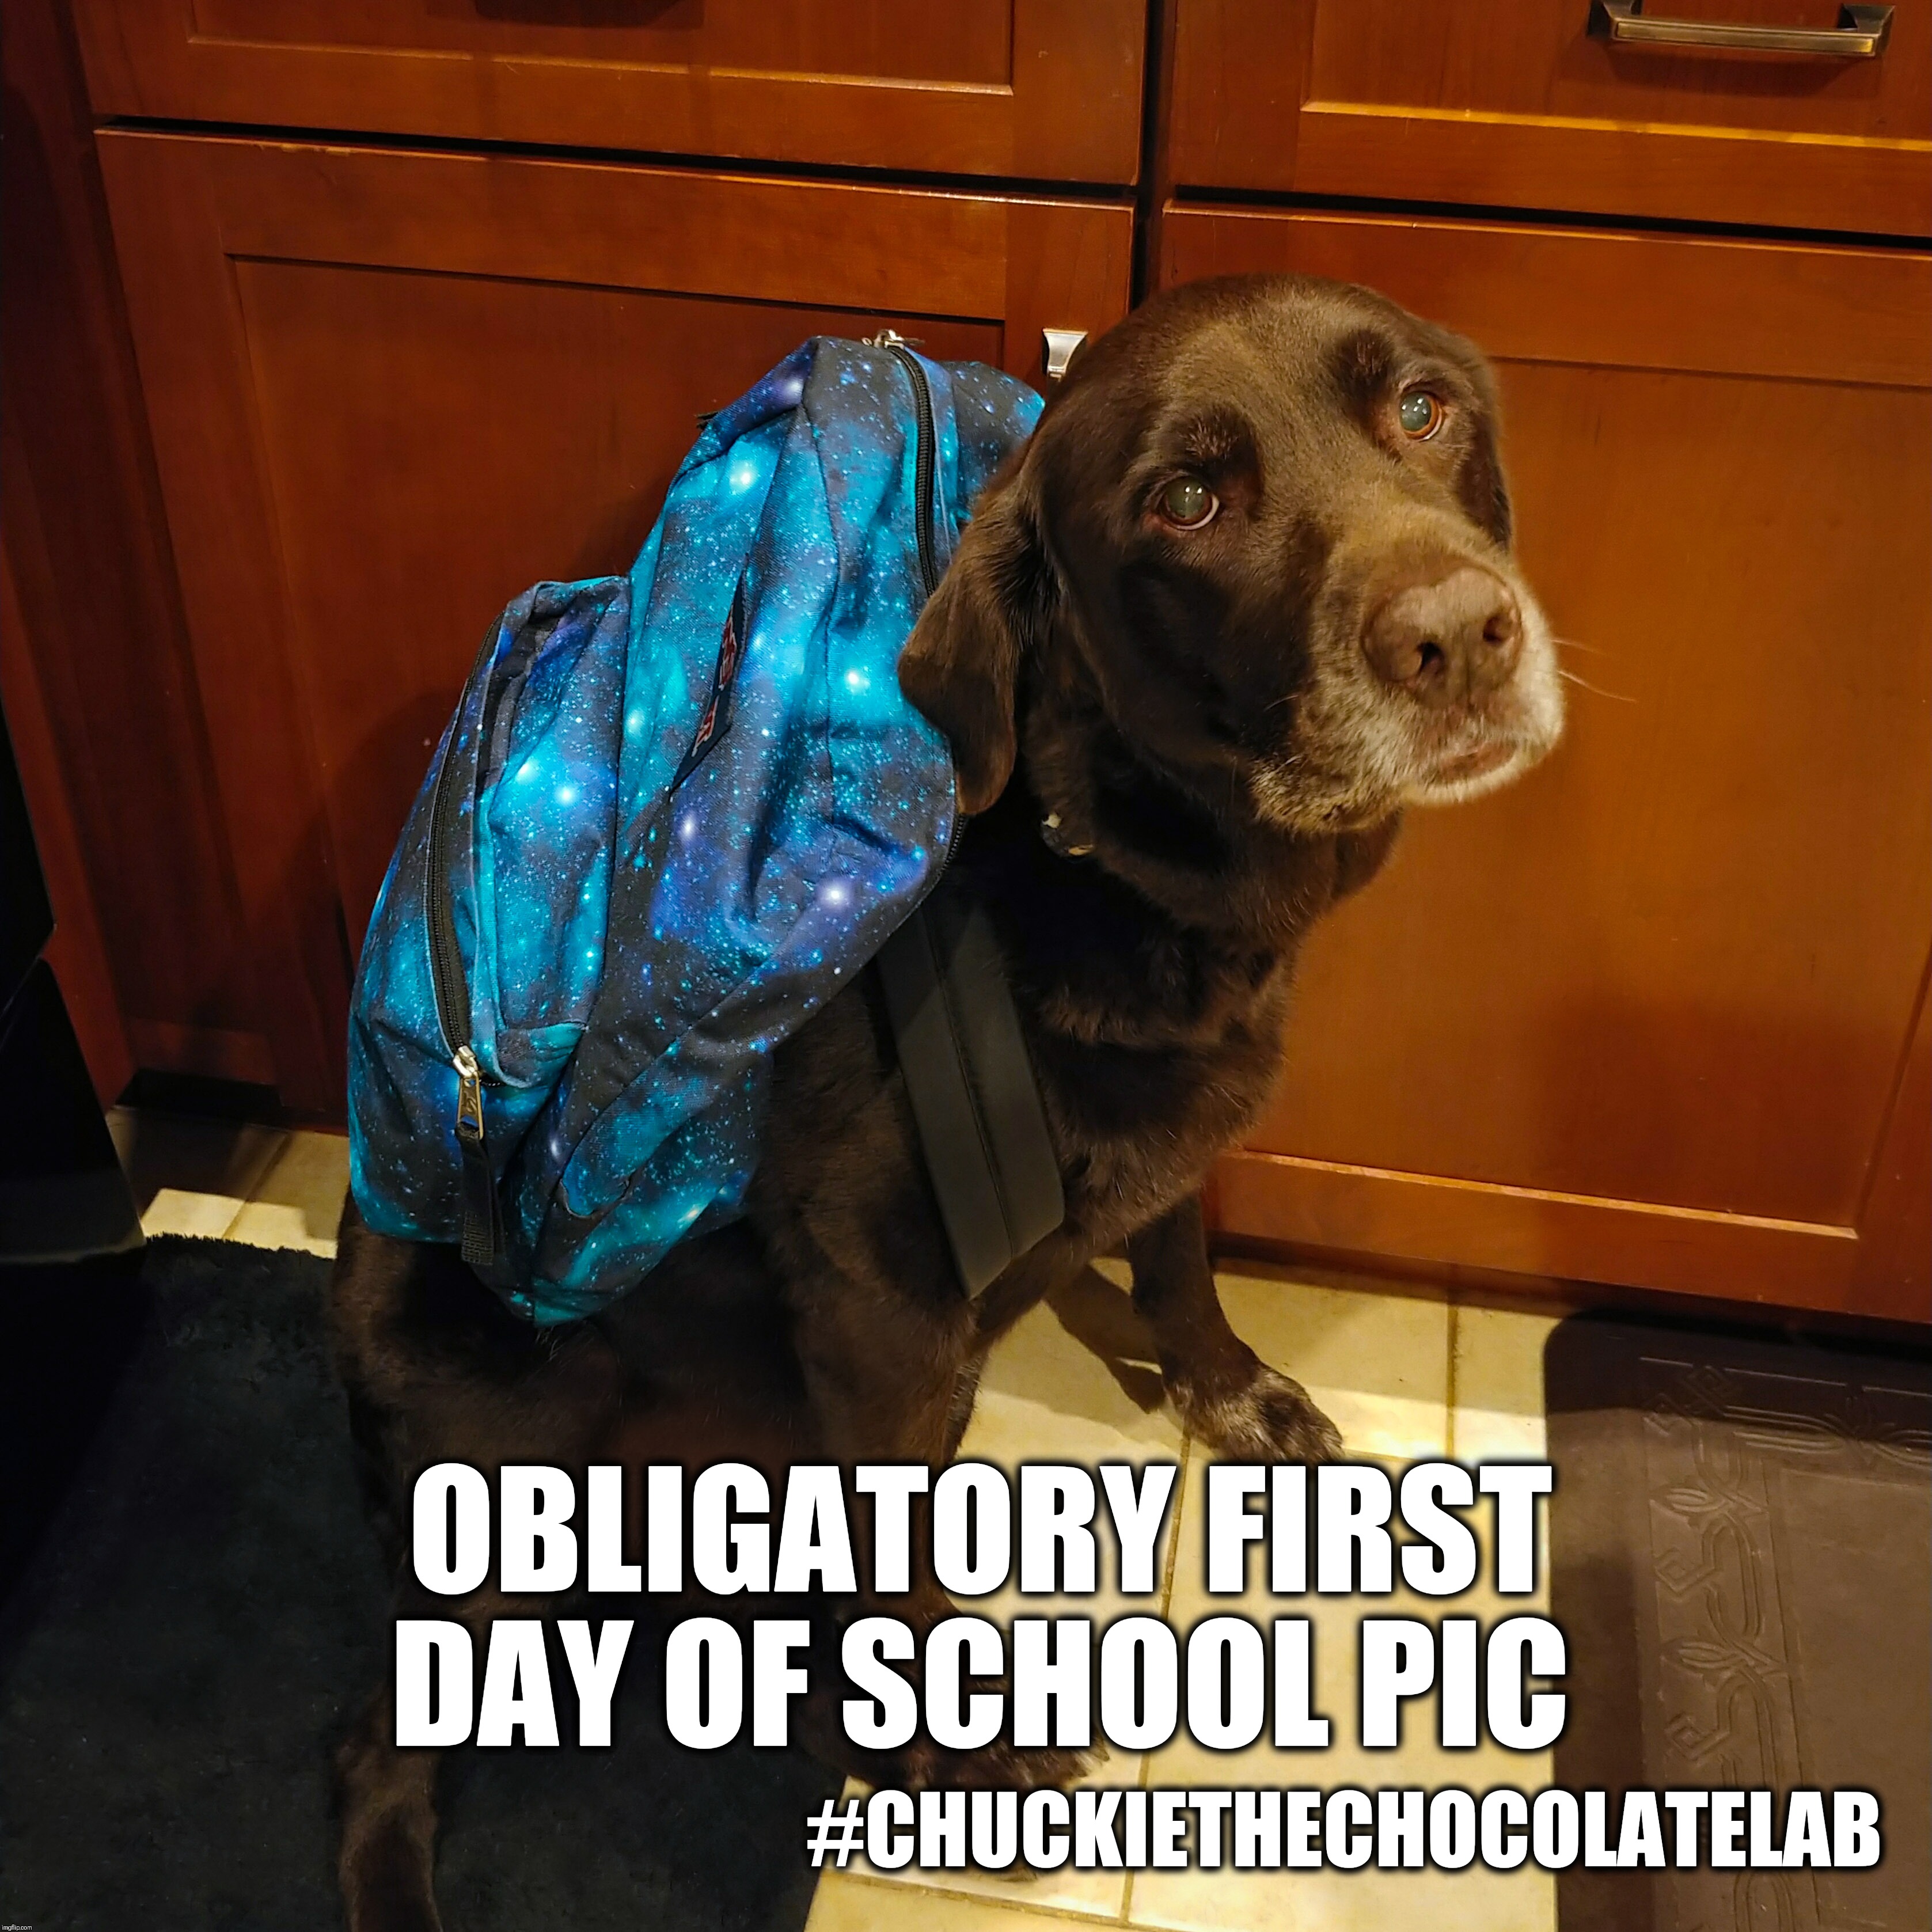 First day of school | OBLIGATORY FIRST DAY OF SCHOOL PIC; #CHUCKIETHECHOCOLATELAB | image tagged in first day of school,1st day of school,back to school,dogs,funny,chuckie the chocolate lab | made w/ Imgflip meme maker